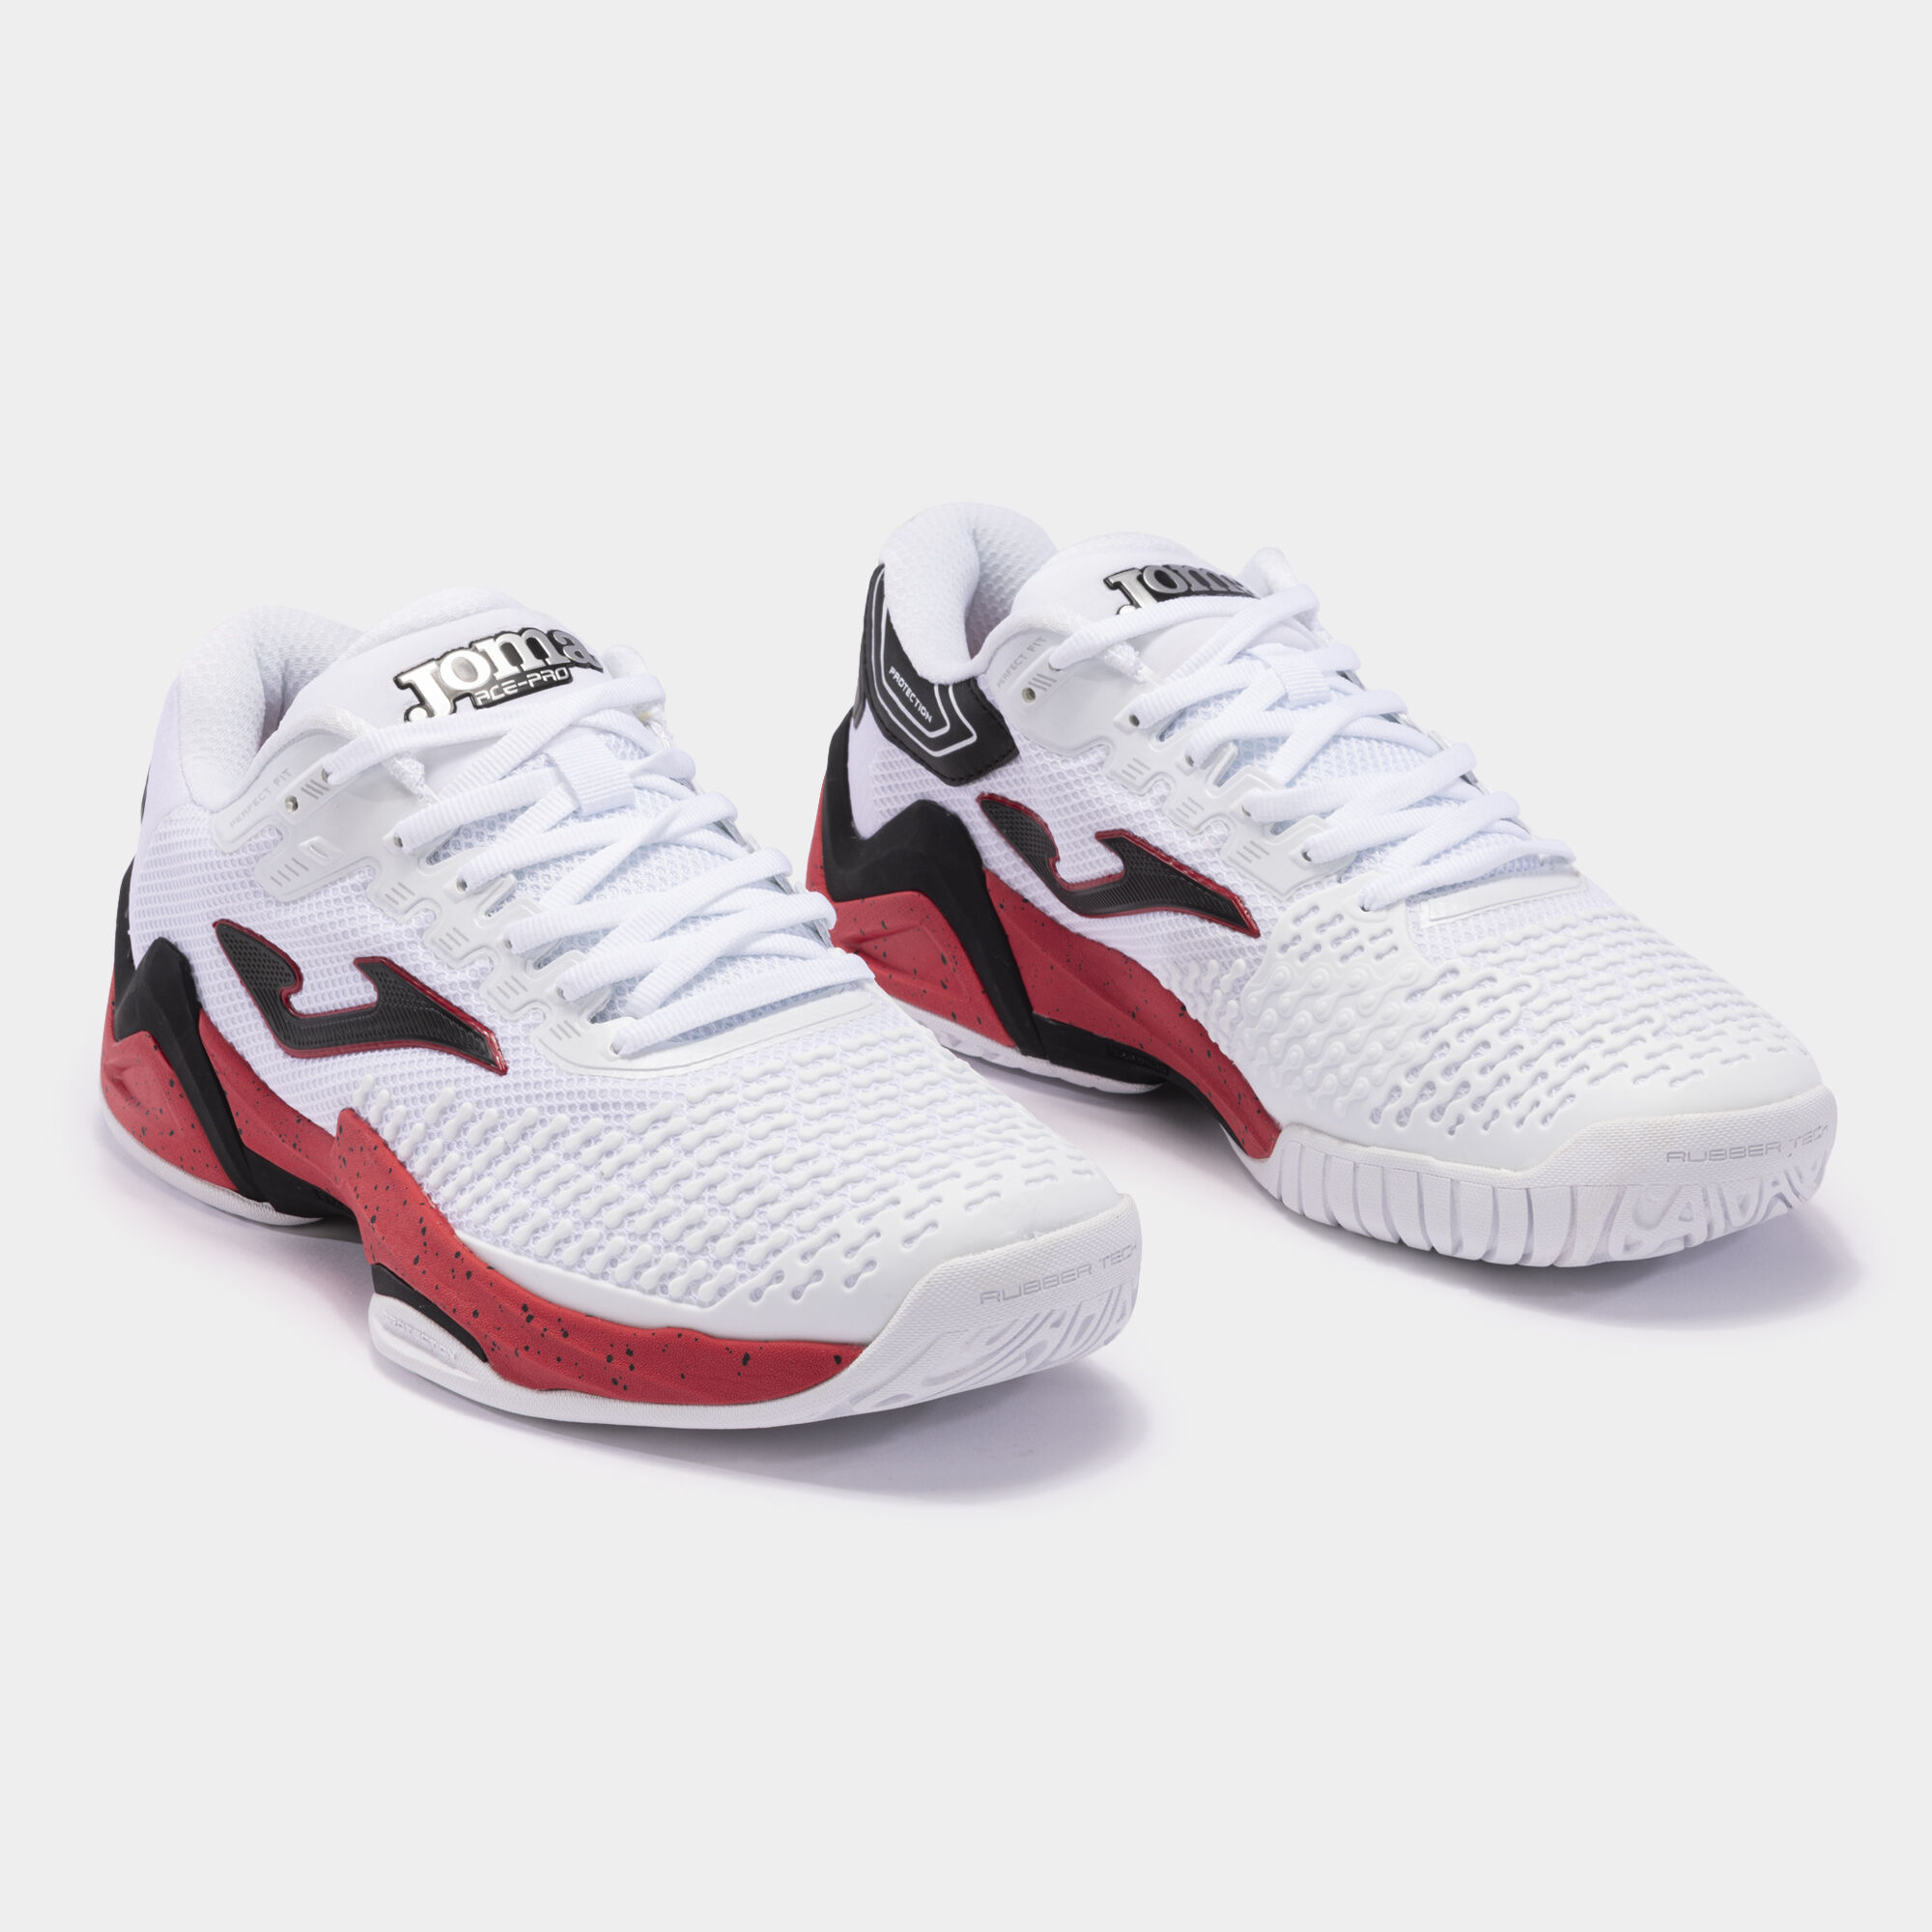 Shoes T.Ace 23 hard court man white red